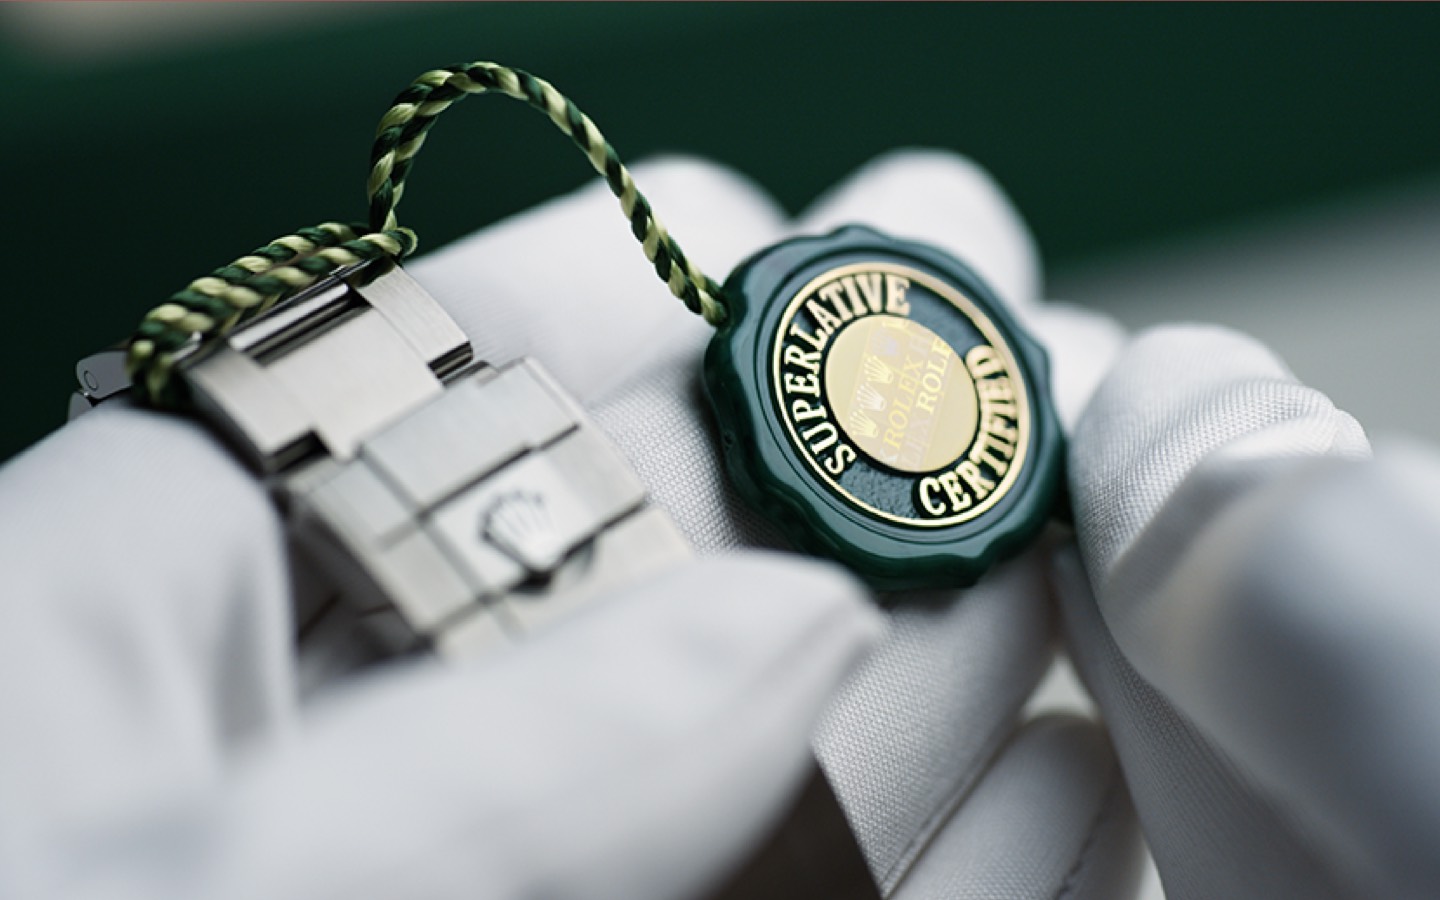 Rolex watchmaking is more than a certification